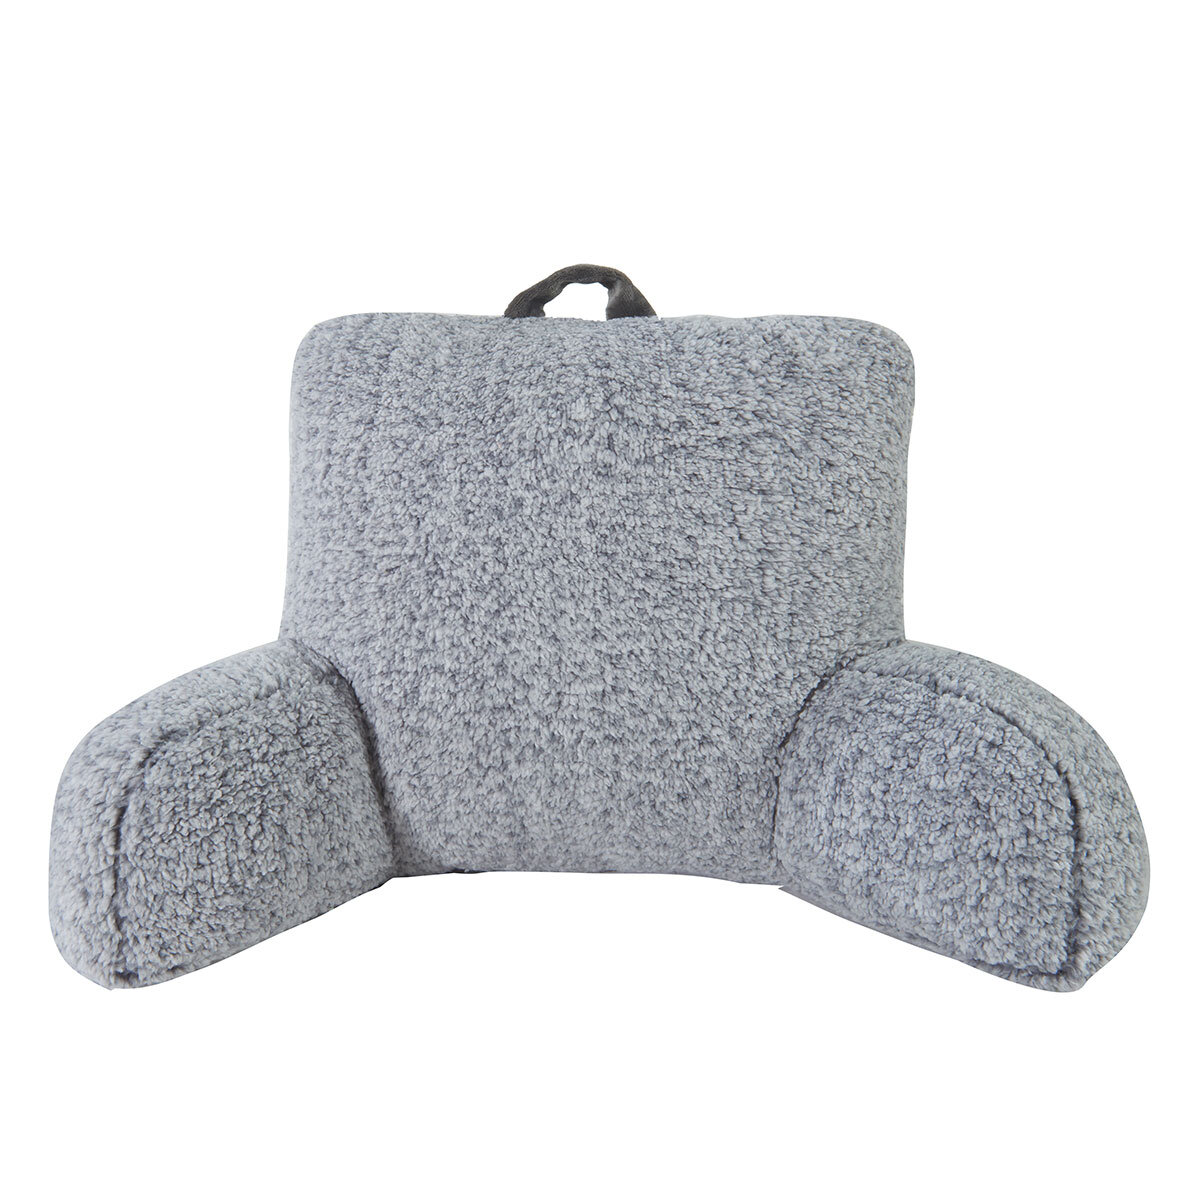 Sherpa bed rest in grey